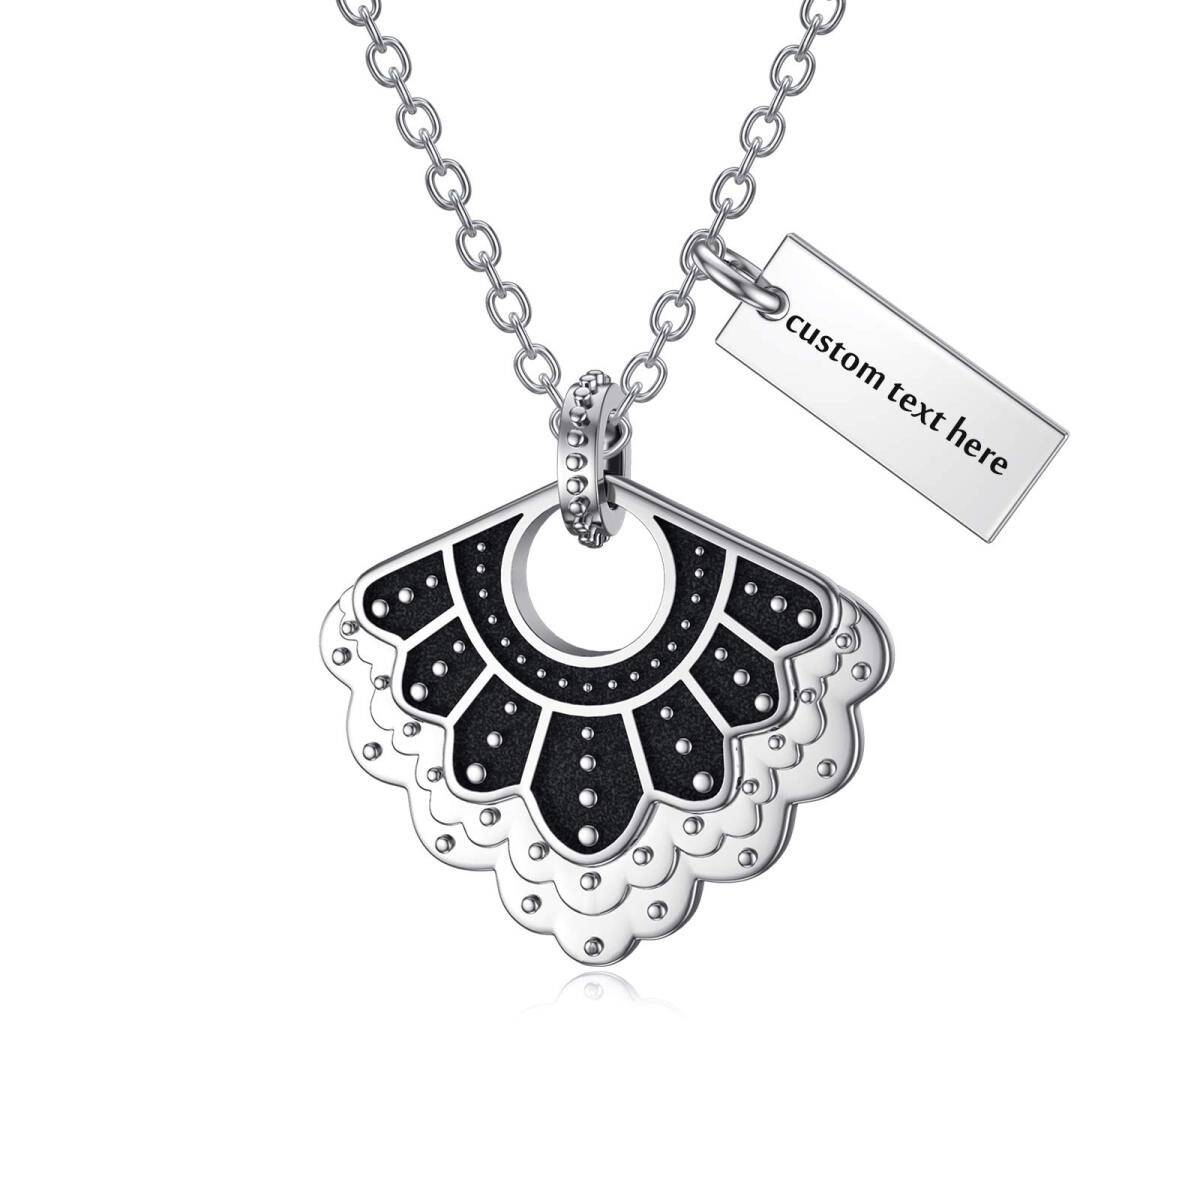 Sterling Silver Personalized Engraving & Ginsberg Collar Pendant Necklace-1